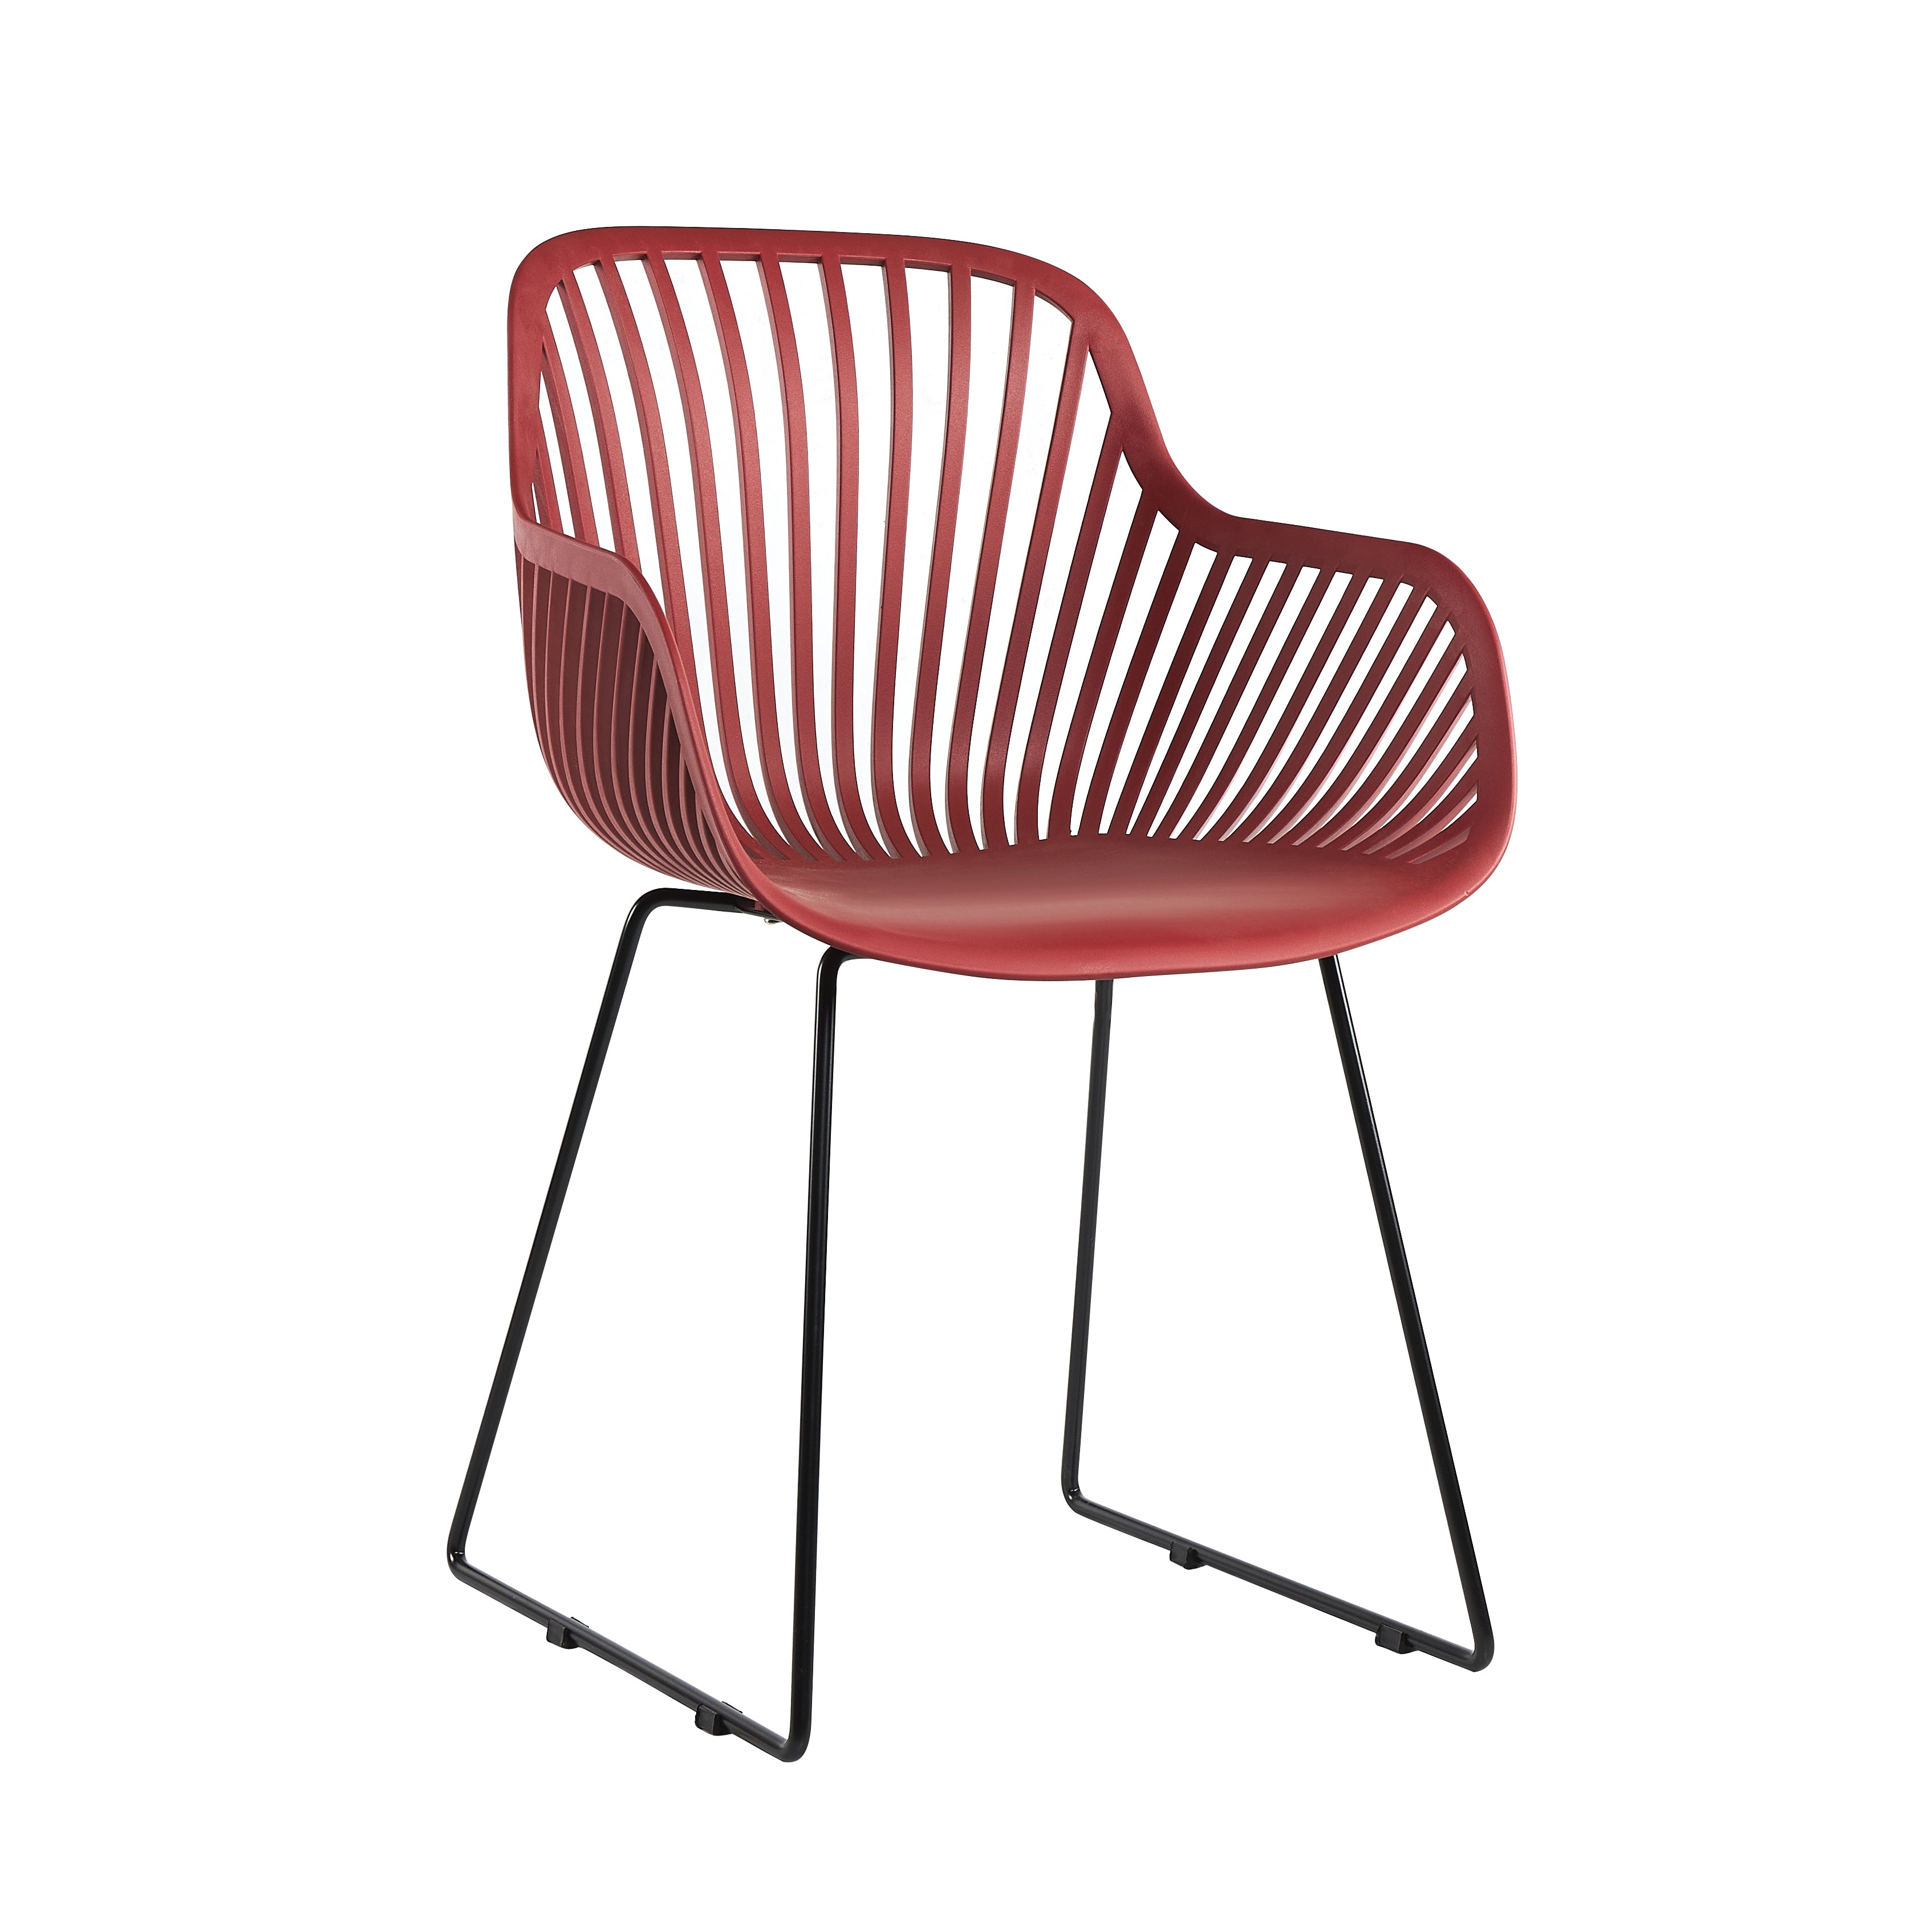 Wally Dining Chair - Wine